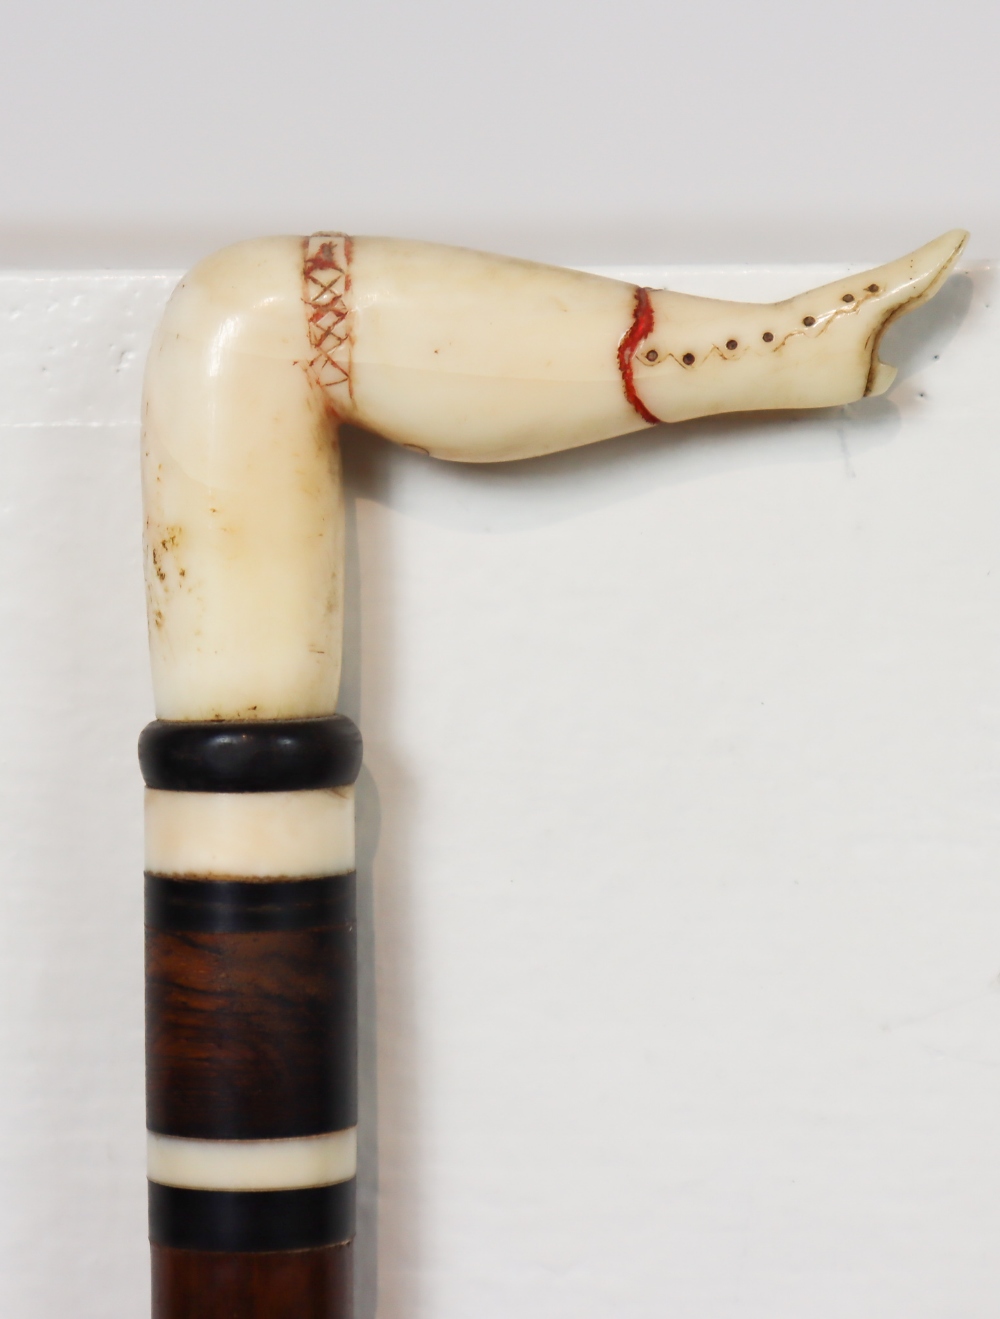 19th C. Whale Bone Boot Handle Cane - Image 5 of 7